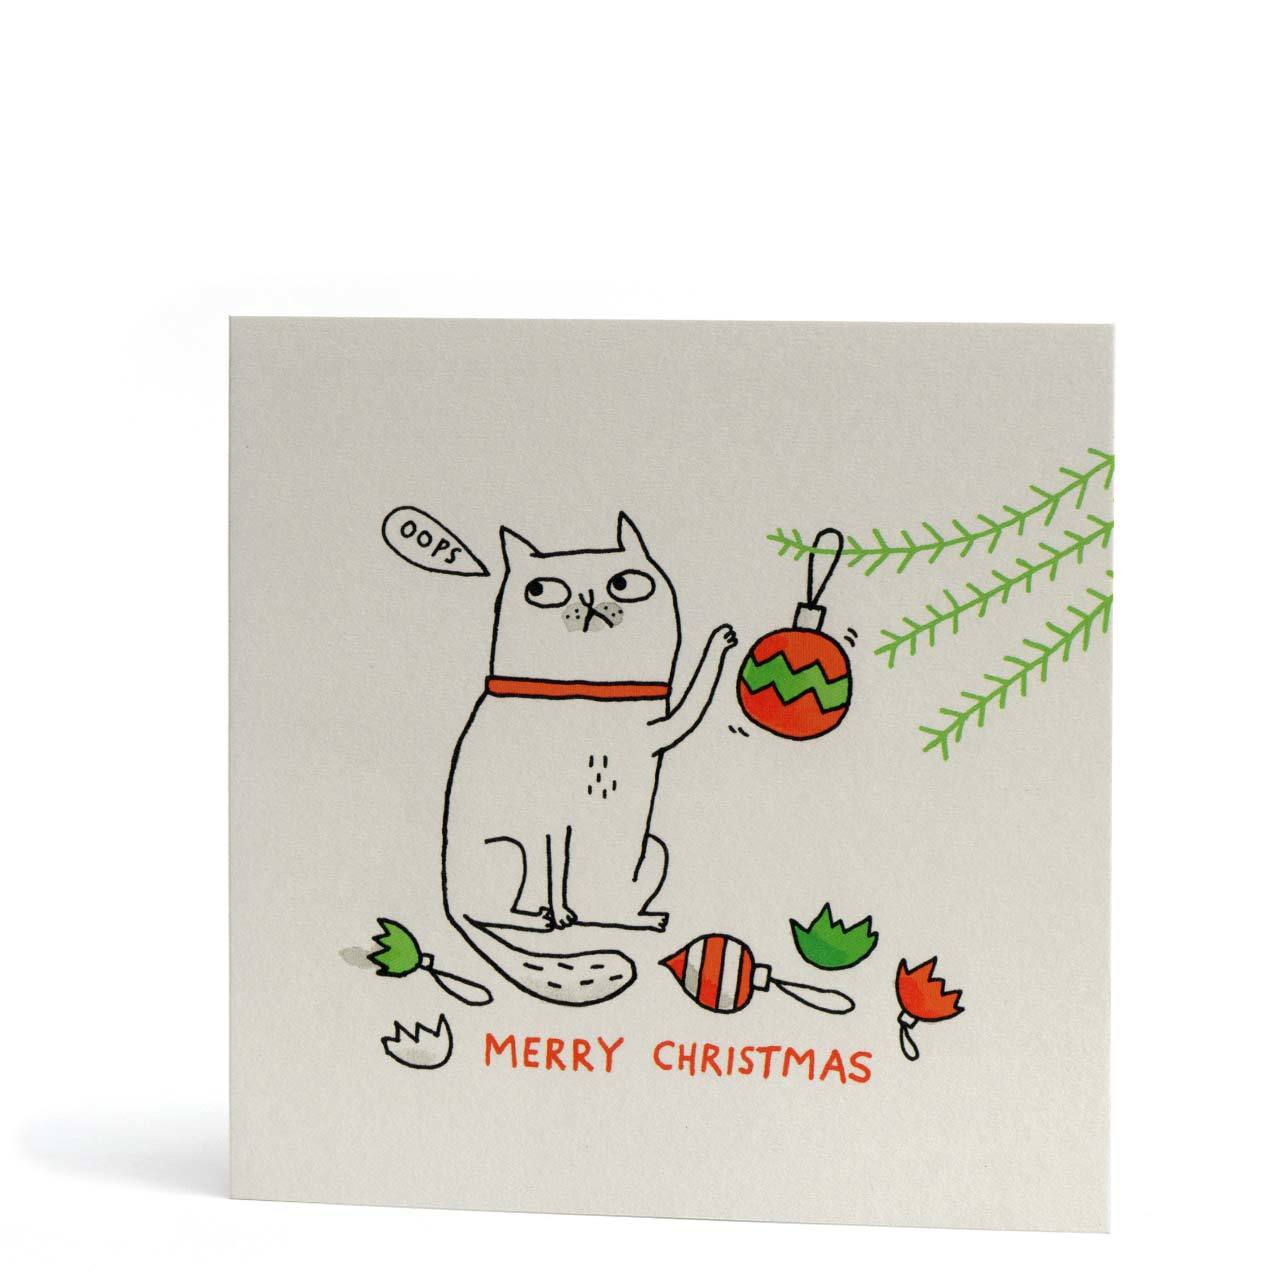 Merry Christmas Oops Greeting Card